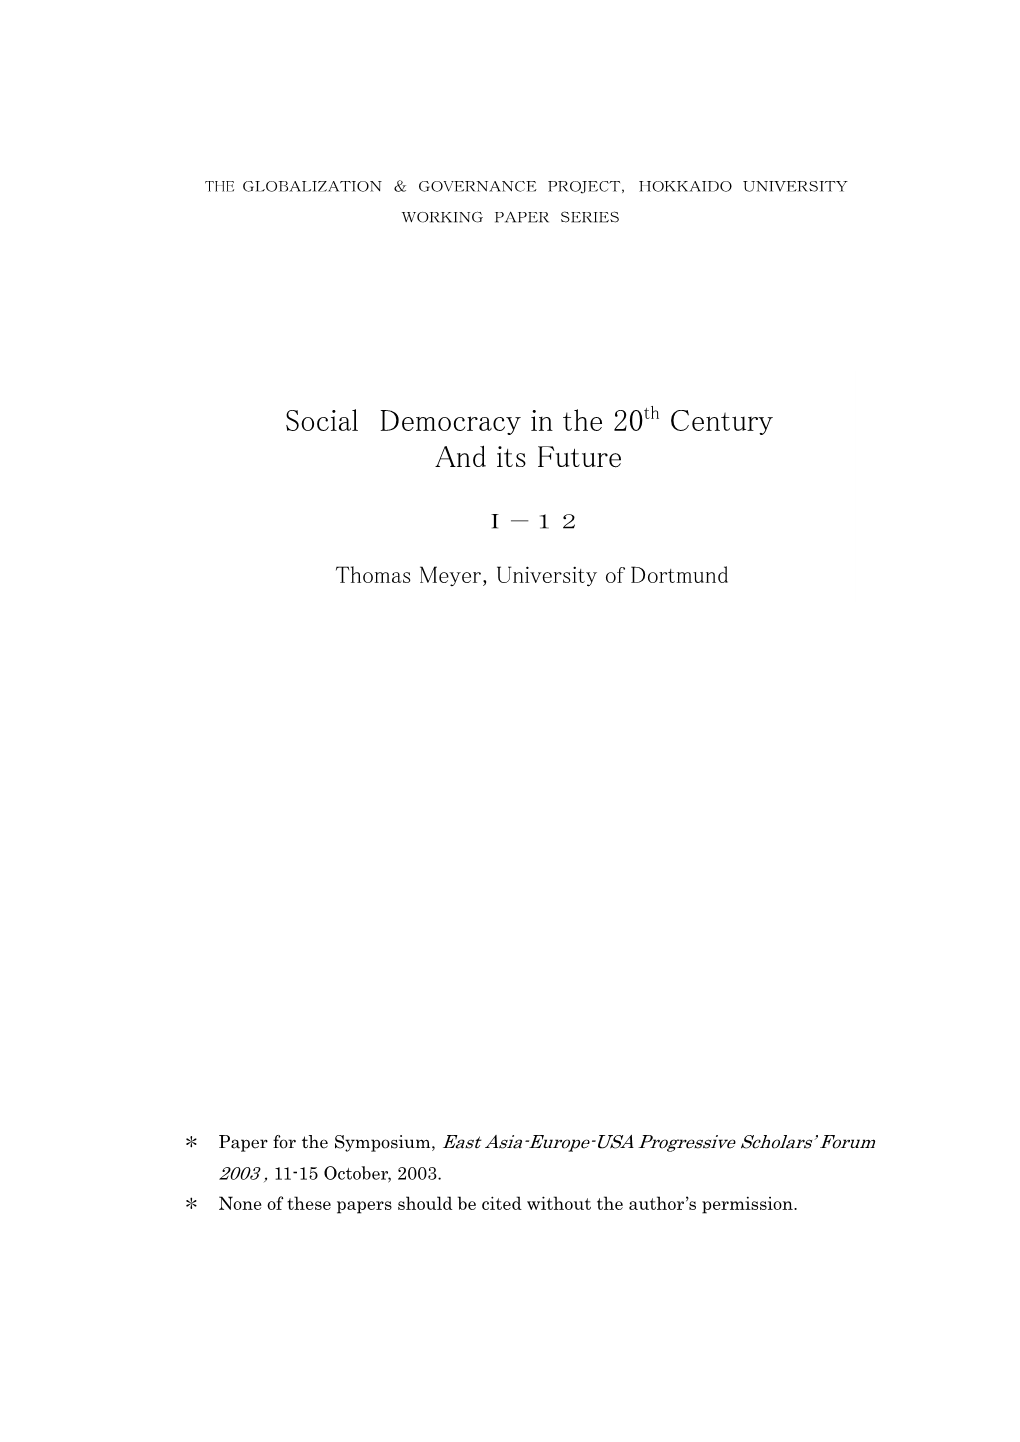 Social Democracy in the 20 Th Century and Its Future